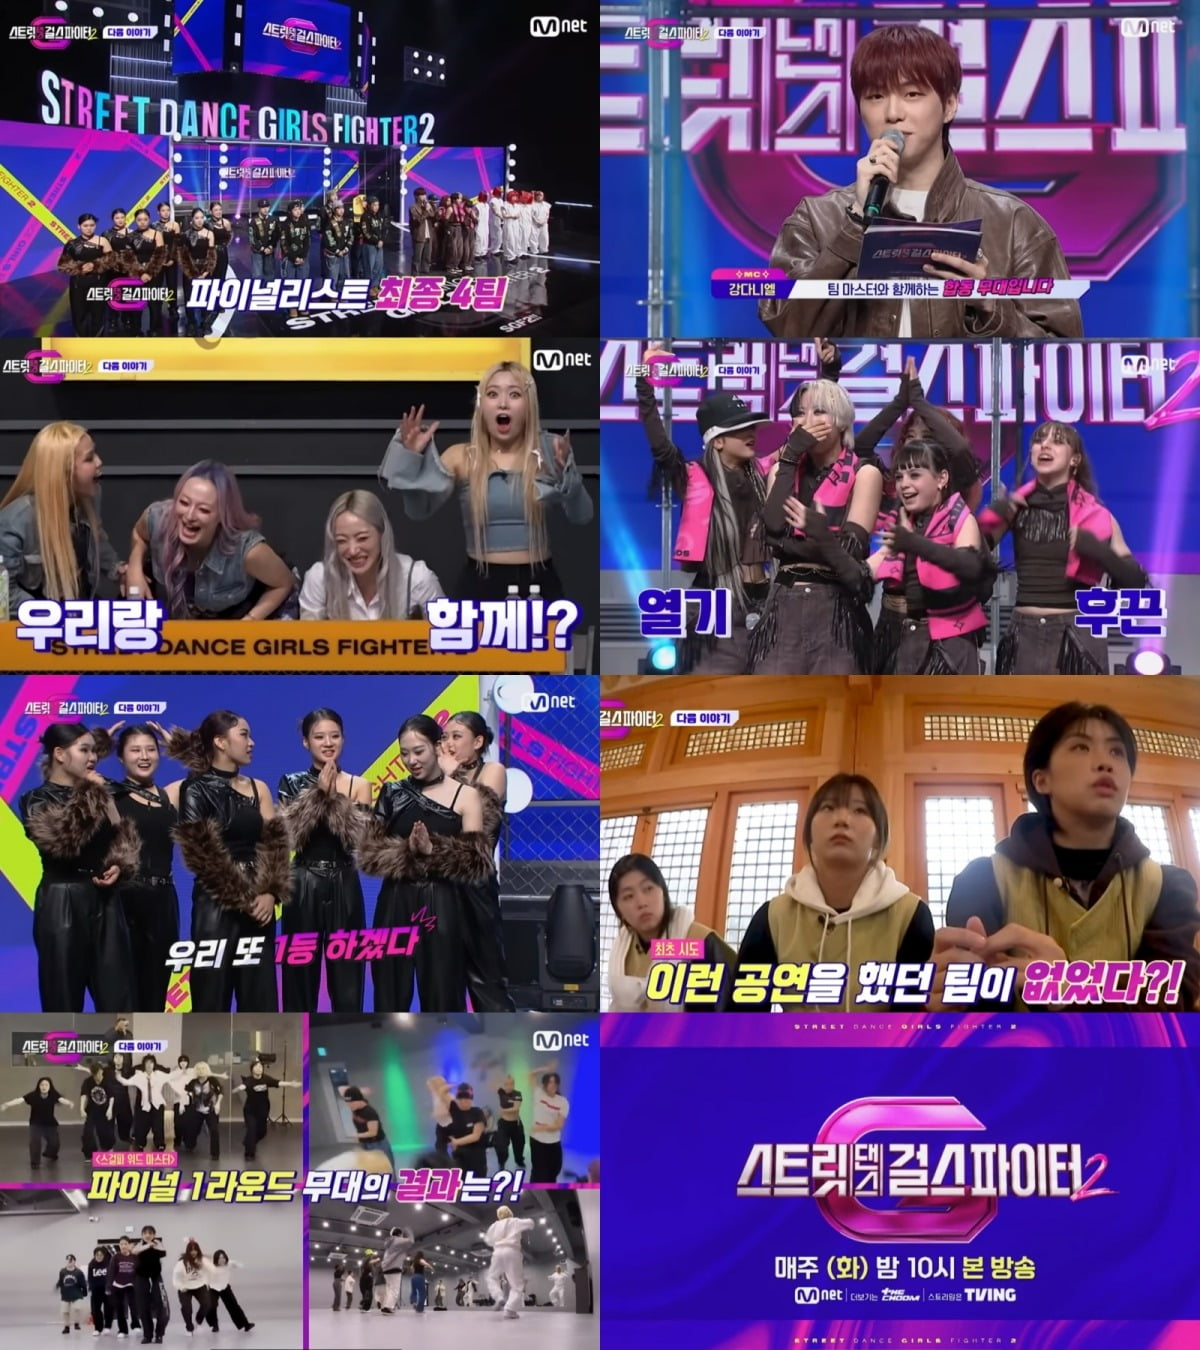 Master and crew create a legendary stage in the finals of 'Street Dance Girls Fighter 2'